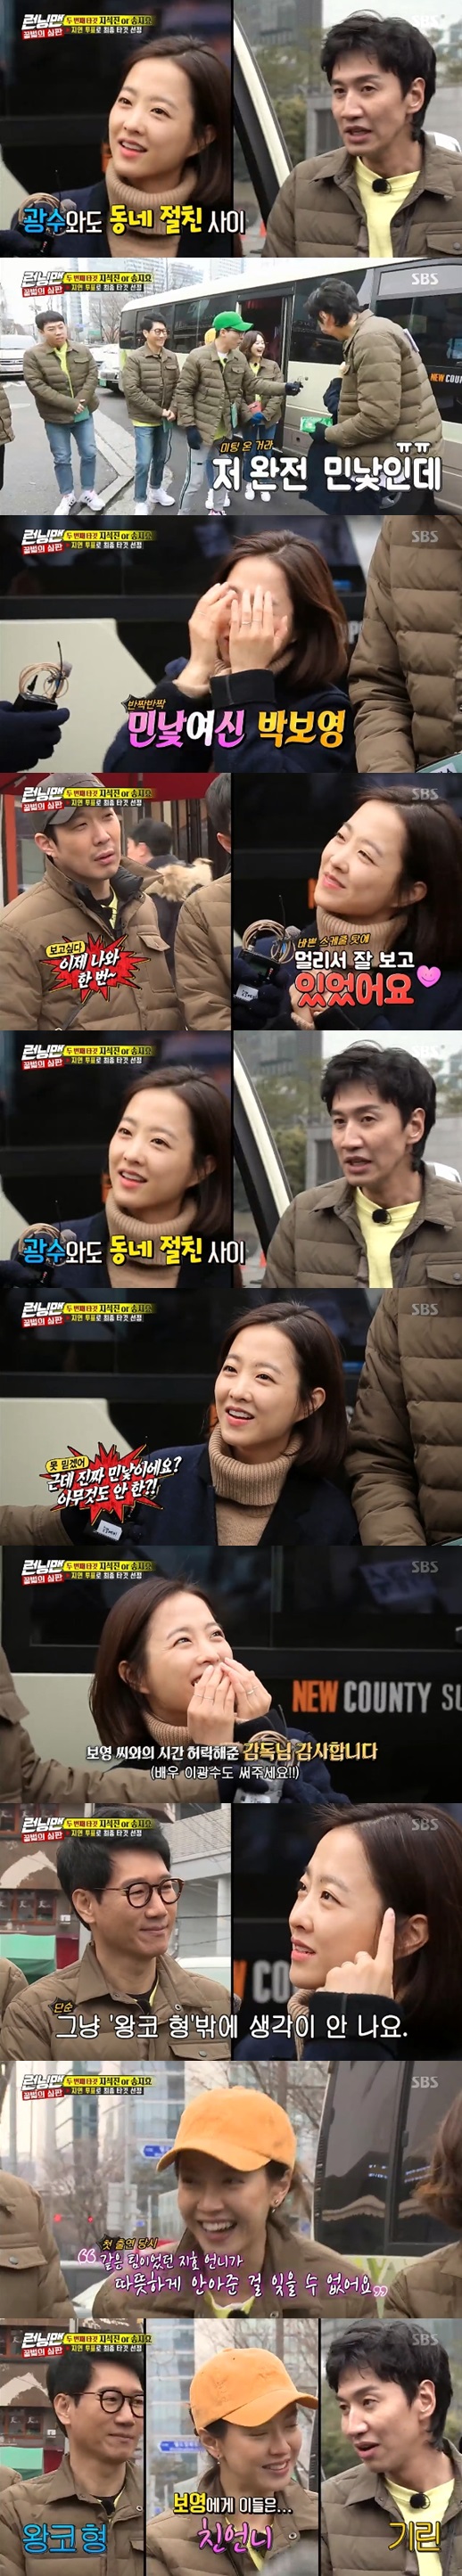 Actor Park Bo-young revealed his friendship with the members of Running Man.SBS Running Man, which was broadcasted on the afternoon of the 3rd, was decorated with Bee Counterattack race, and the members who met Park Bo-young on the street were drawn.In the process of selecting the dropouts by the acquaintance vote on the day, the members were surprised to find Park Bo-young passing through the street.Park Bo-young, who visited Sangam, a drama shooting car, also found a shooting scene of Running Man and ran to a nice face.Park Bo-young, who showed up as a stranger, said, I am so embarrassed. I have hardly made makeup. However, the members said, I did not, but it is so beautiful.Yoo Jae-Suk said, It is almost our Running Man family, but I can not see it these days. Bo-young came to our early days and suffered a lot.I have a lot of dinners, he said. I am really close to Gwangsu. Lee Kwang-soo boasted that he was a really family-like person.Park Bo-young asked about the impression of Ji Suk-jin and Song Ji-hyo, who were candidates for the dropout, and said, Ji Suk-jin thinks only of Wangko. Song Ji-hyo was a team with her sister when she first came out. Song Ji-hyo is like a sister to me. In the meantime, Park Bo-young asked, Is Lee Kwang-soo? Park Bo-young showed a sense of answering Girin dryly.